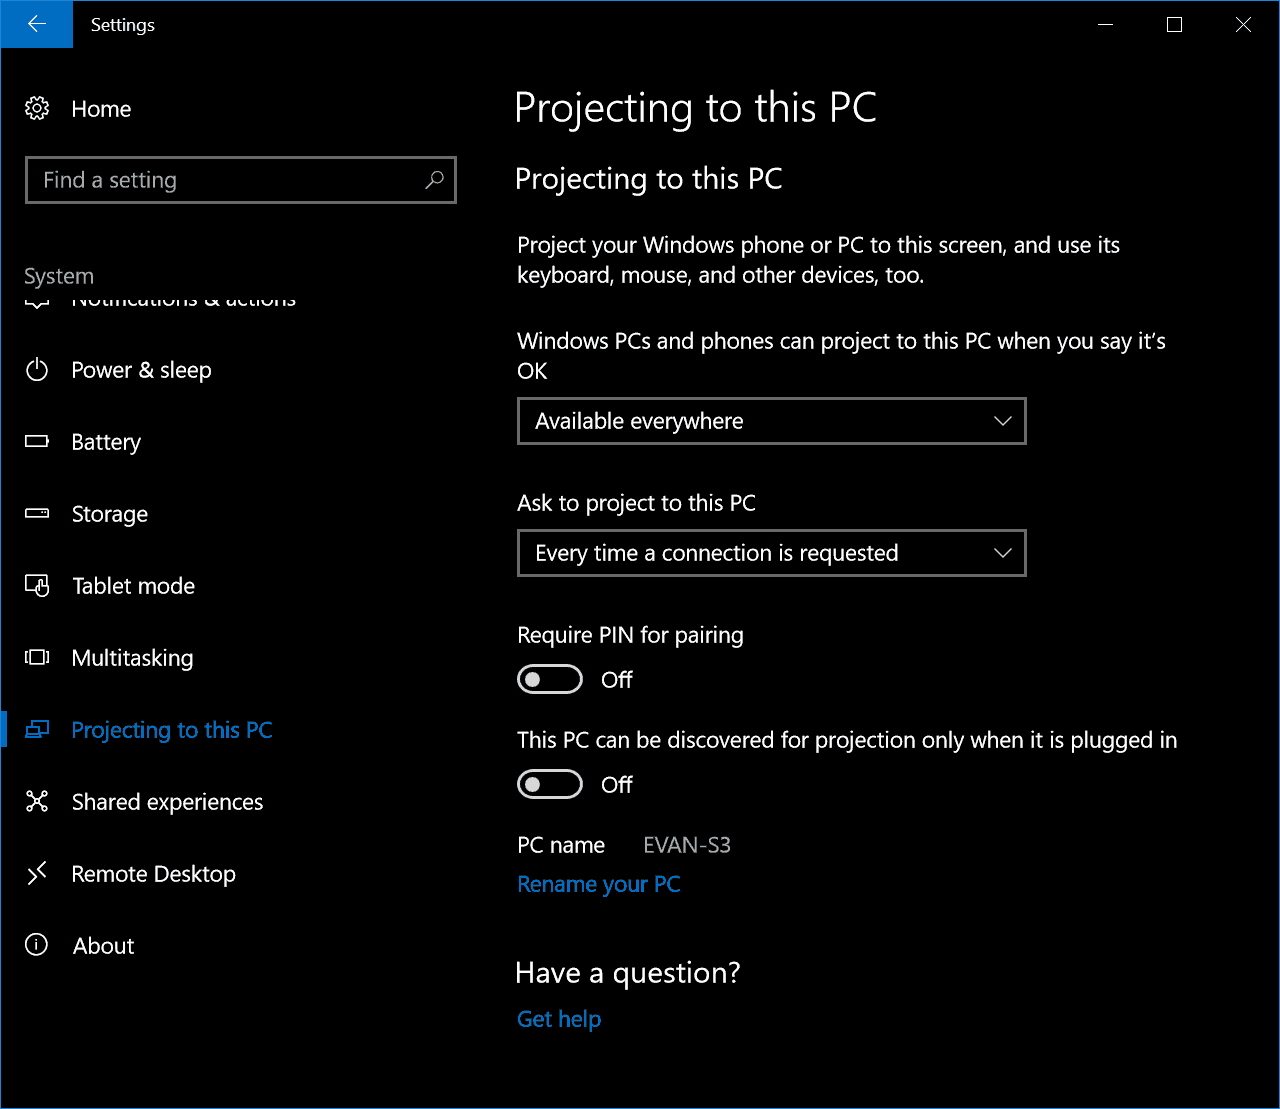 Projecting to this PC settings page